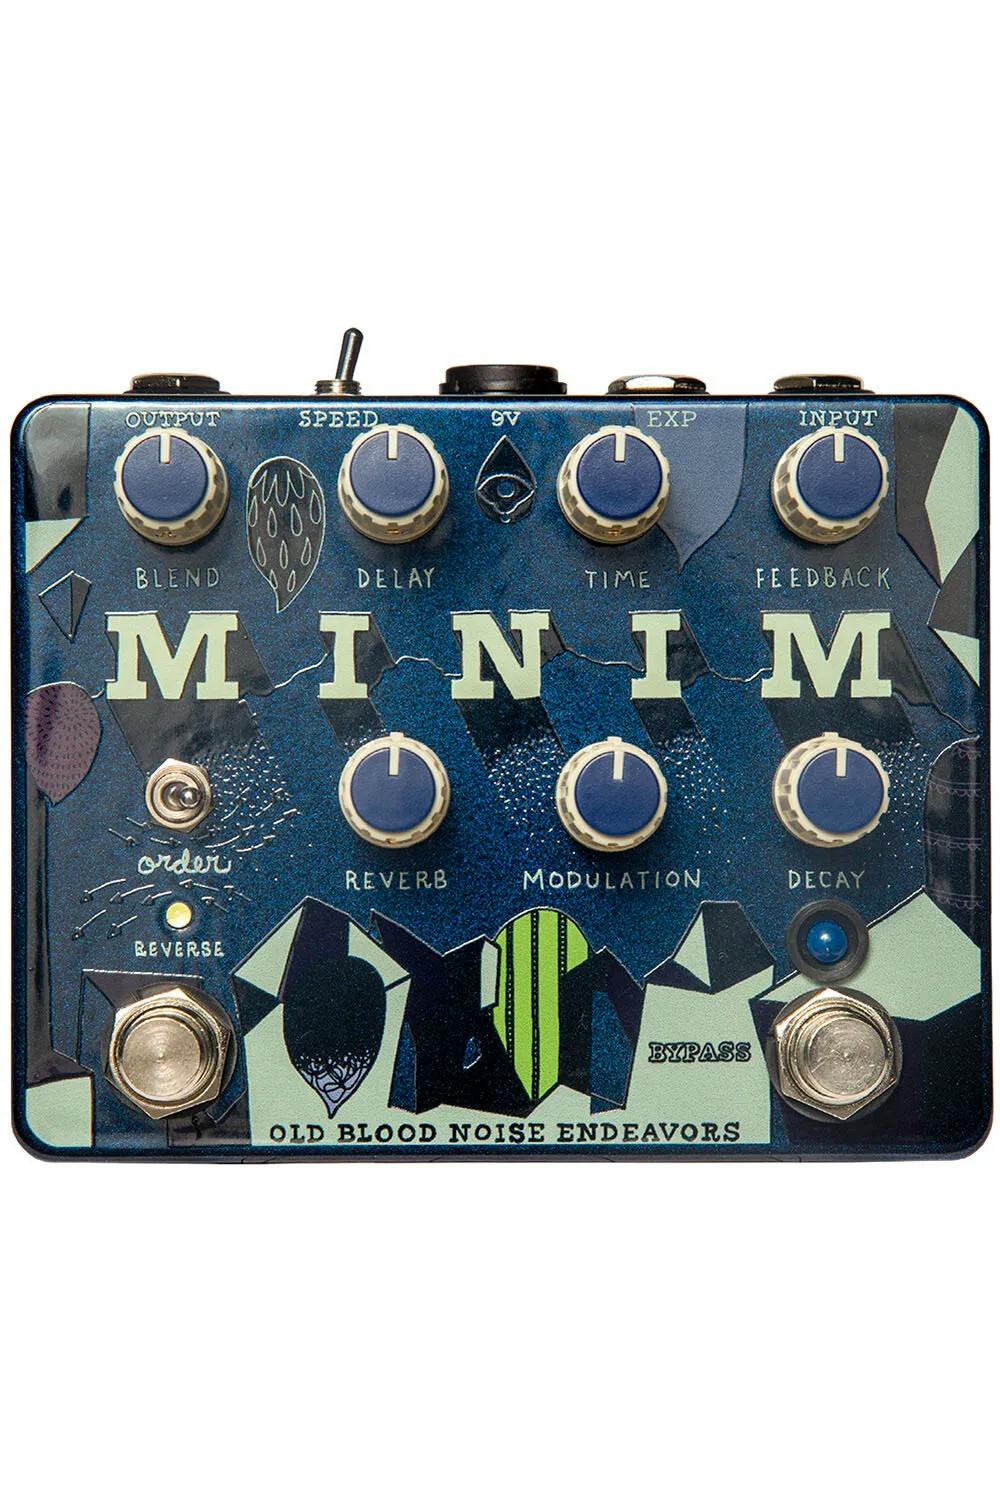 Minim Guitar Pedal By Old Blood Noise Endeavors